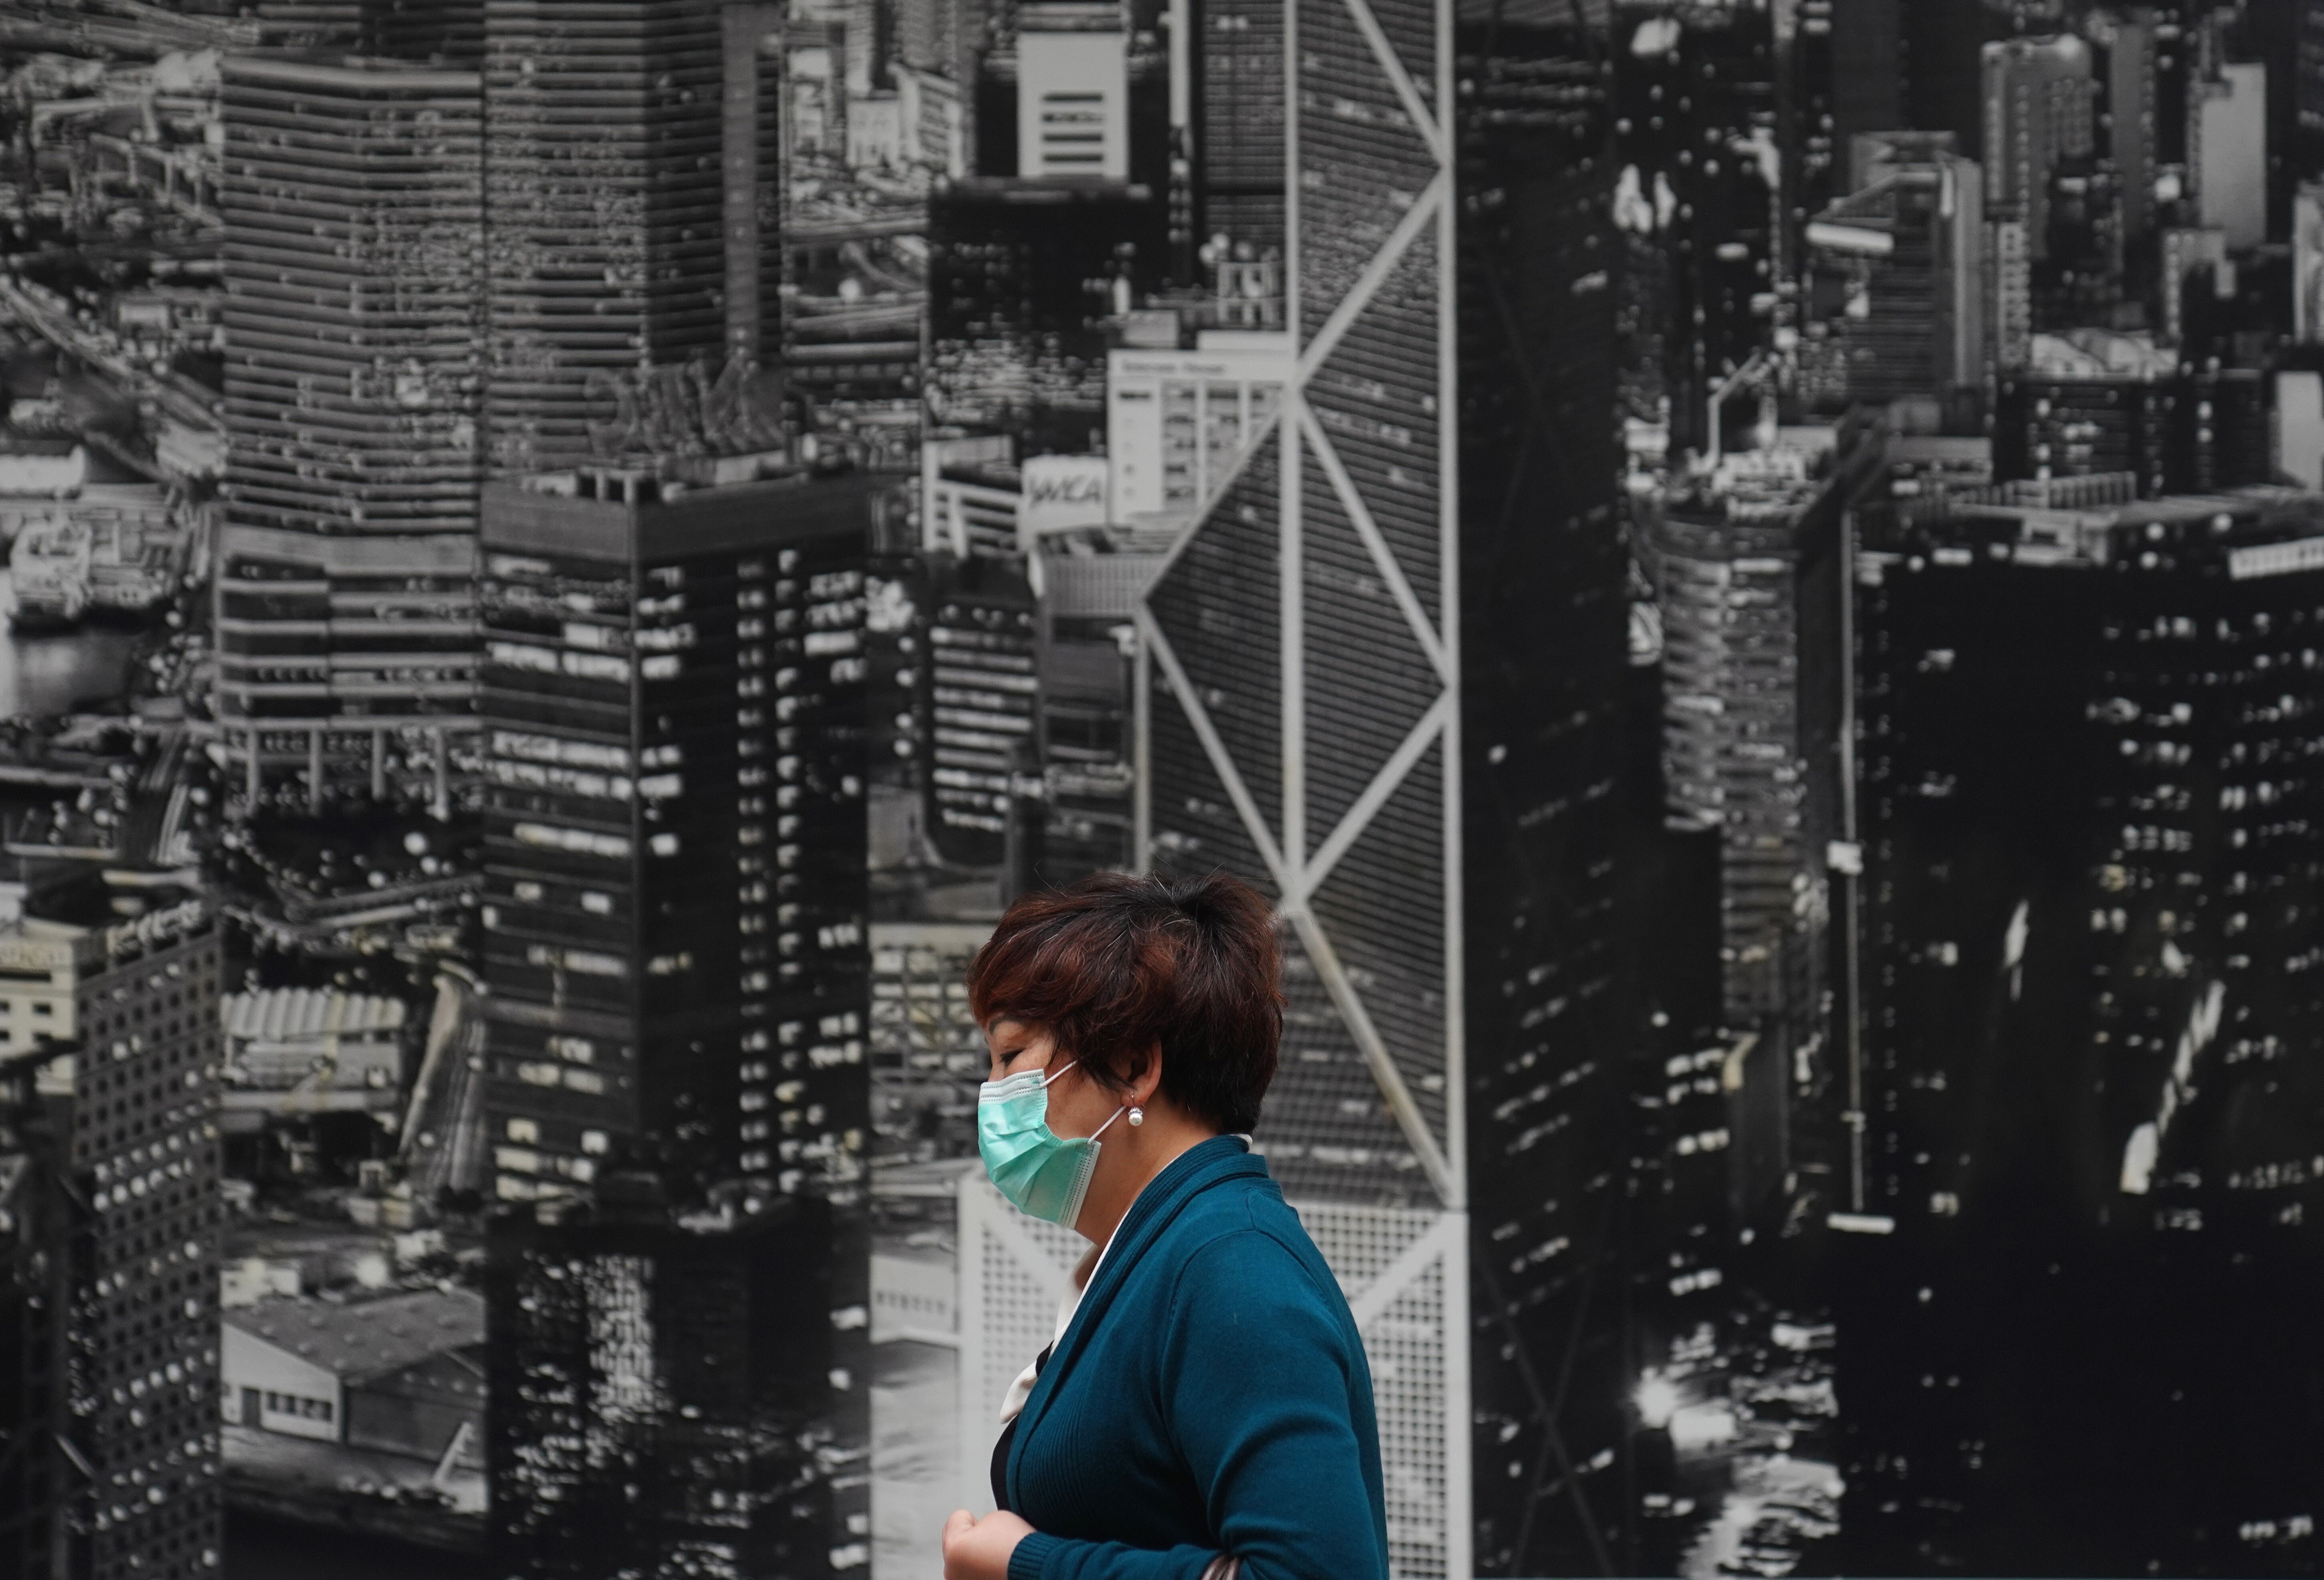 Hong Kong has been reeling from the months-long anti-government protests and the Covid-19 pandemic. Photo: Sam Tsang